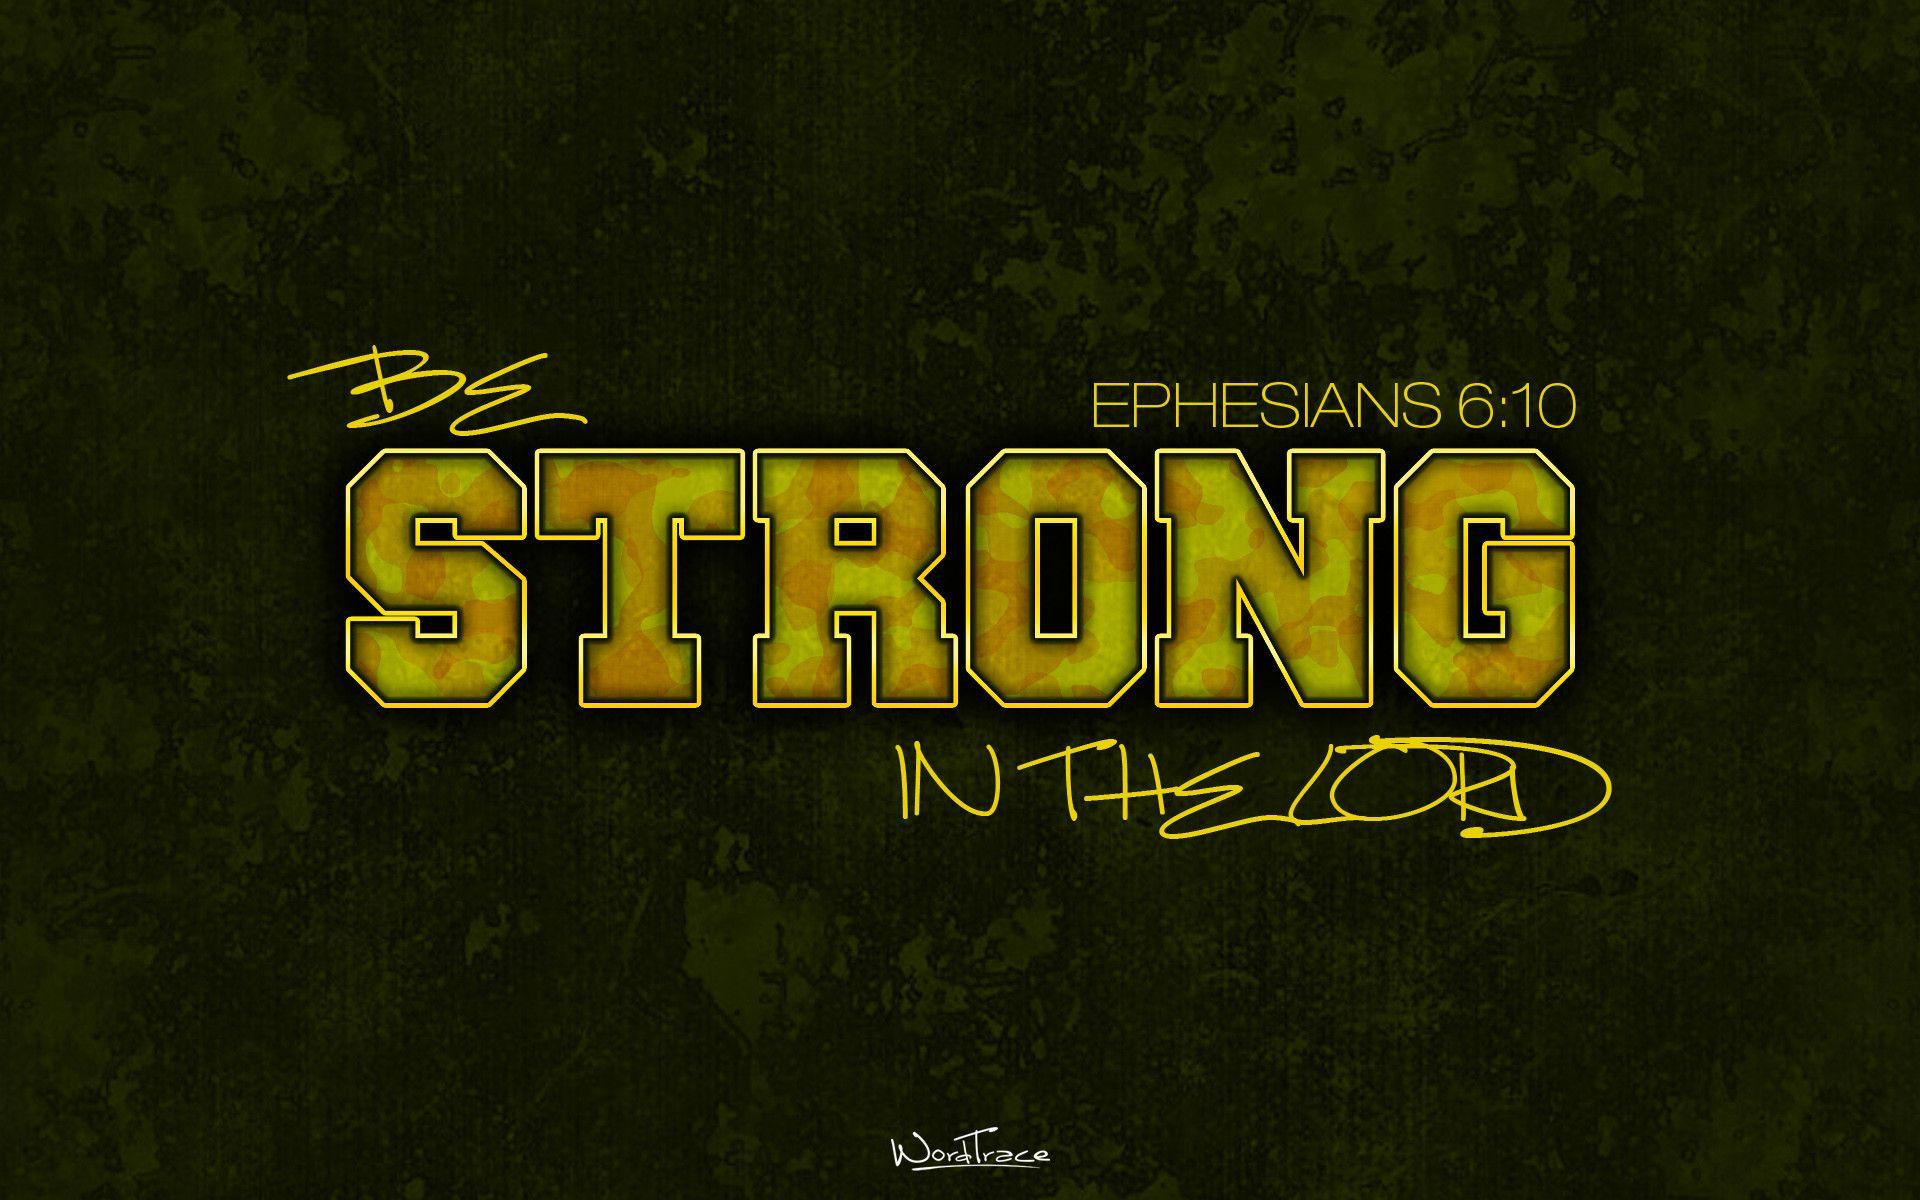 Army Strong Wallpaper